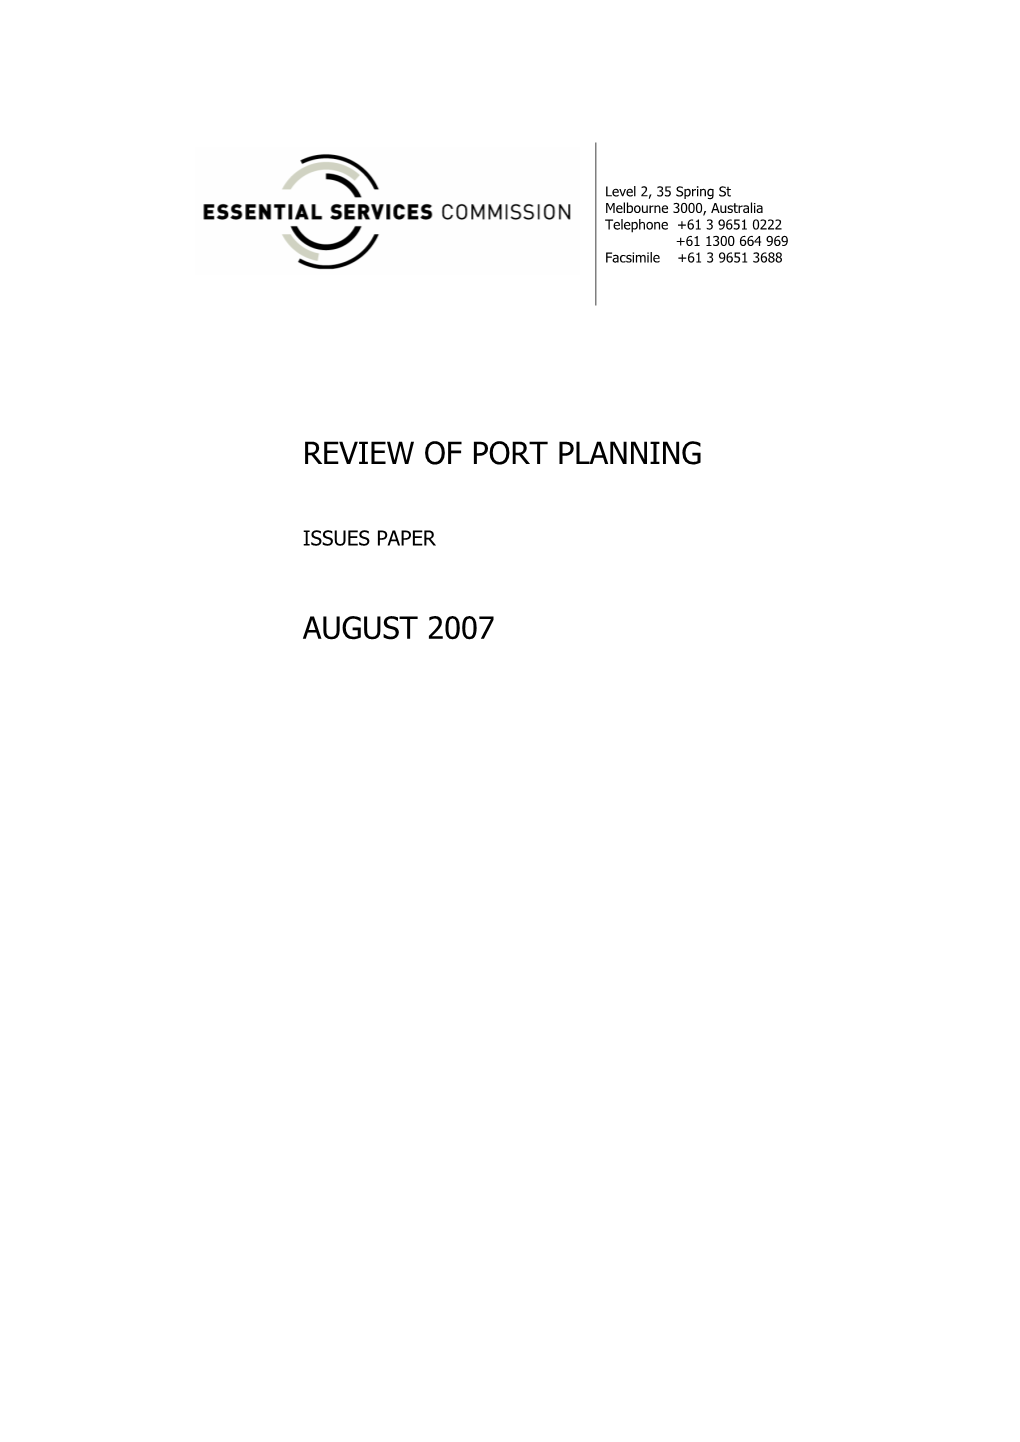 Review of Port Planning August 2007